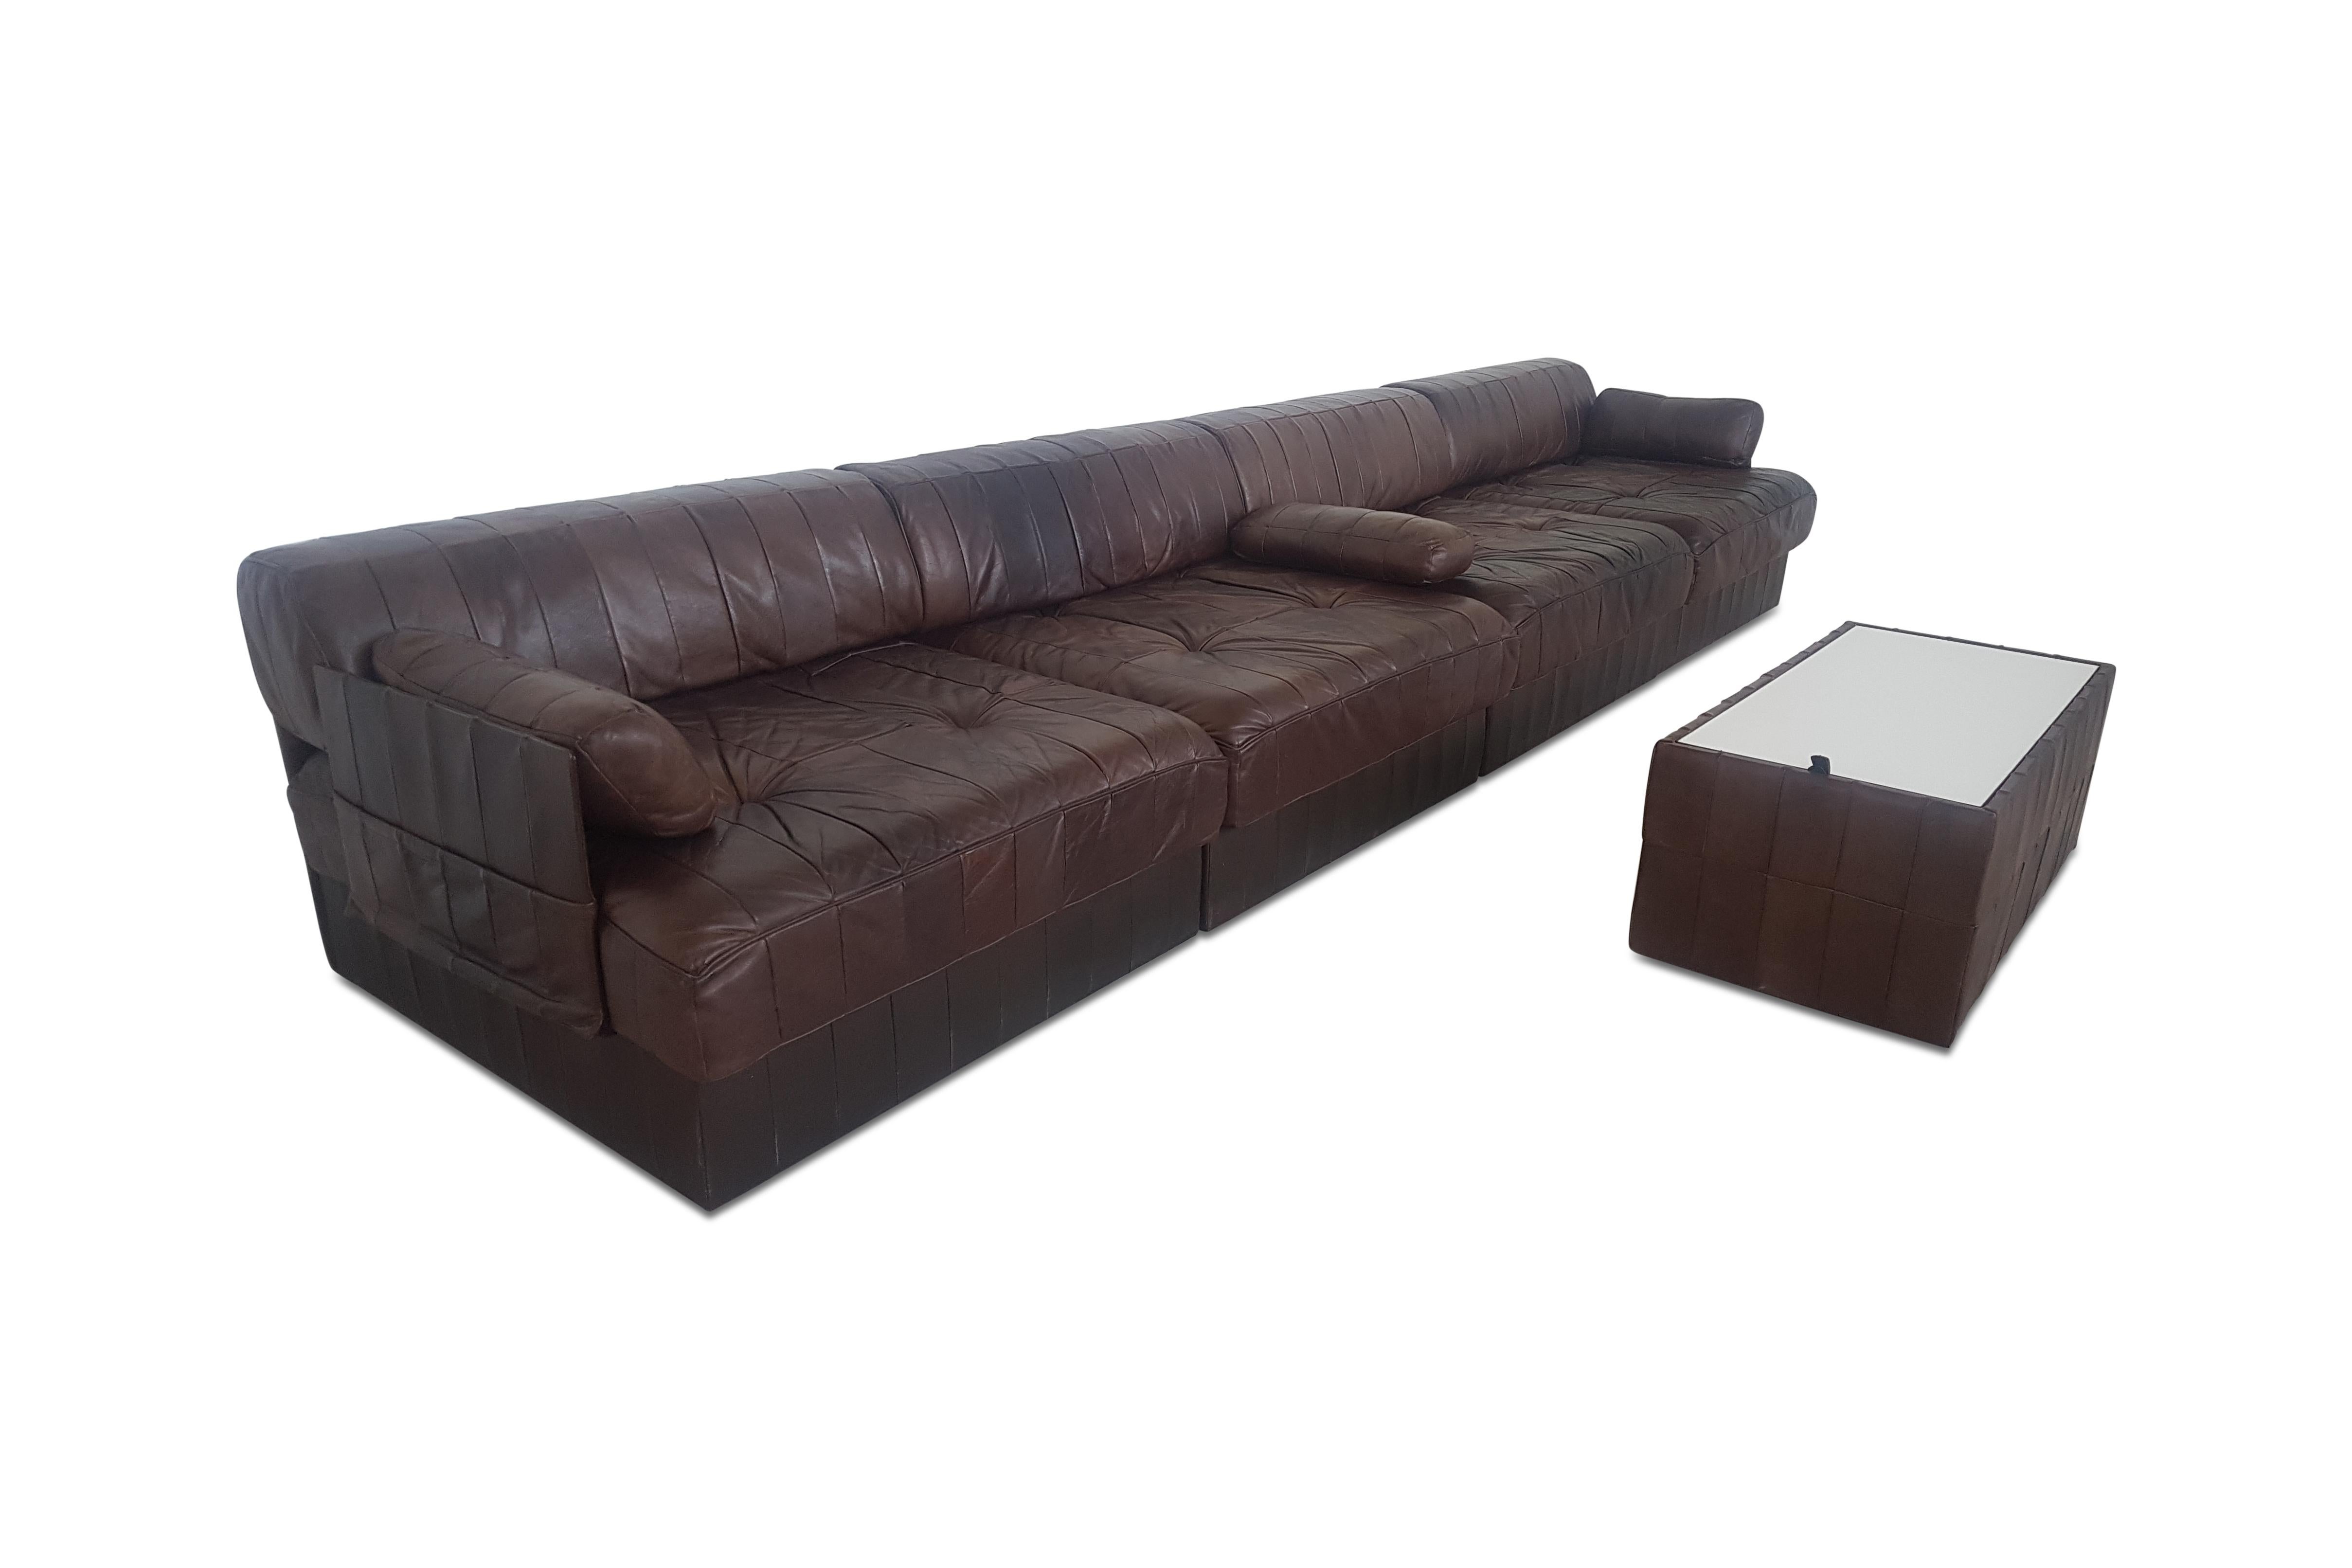 De Sede modular sectional leather sofa in dark brown patch work leather.
The sofa is in four sections, each with a base leather patchwork cushion and a back cushion made from the same soft luxurious leather. A small side table which can also be